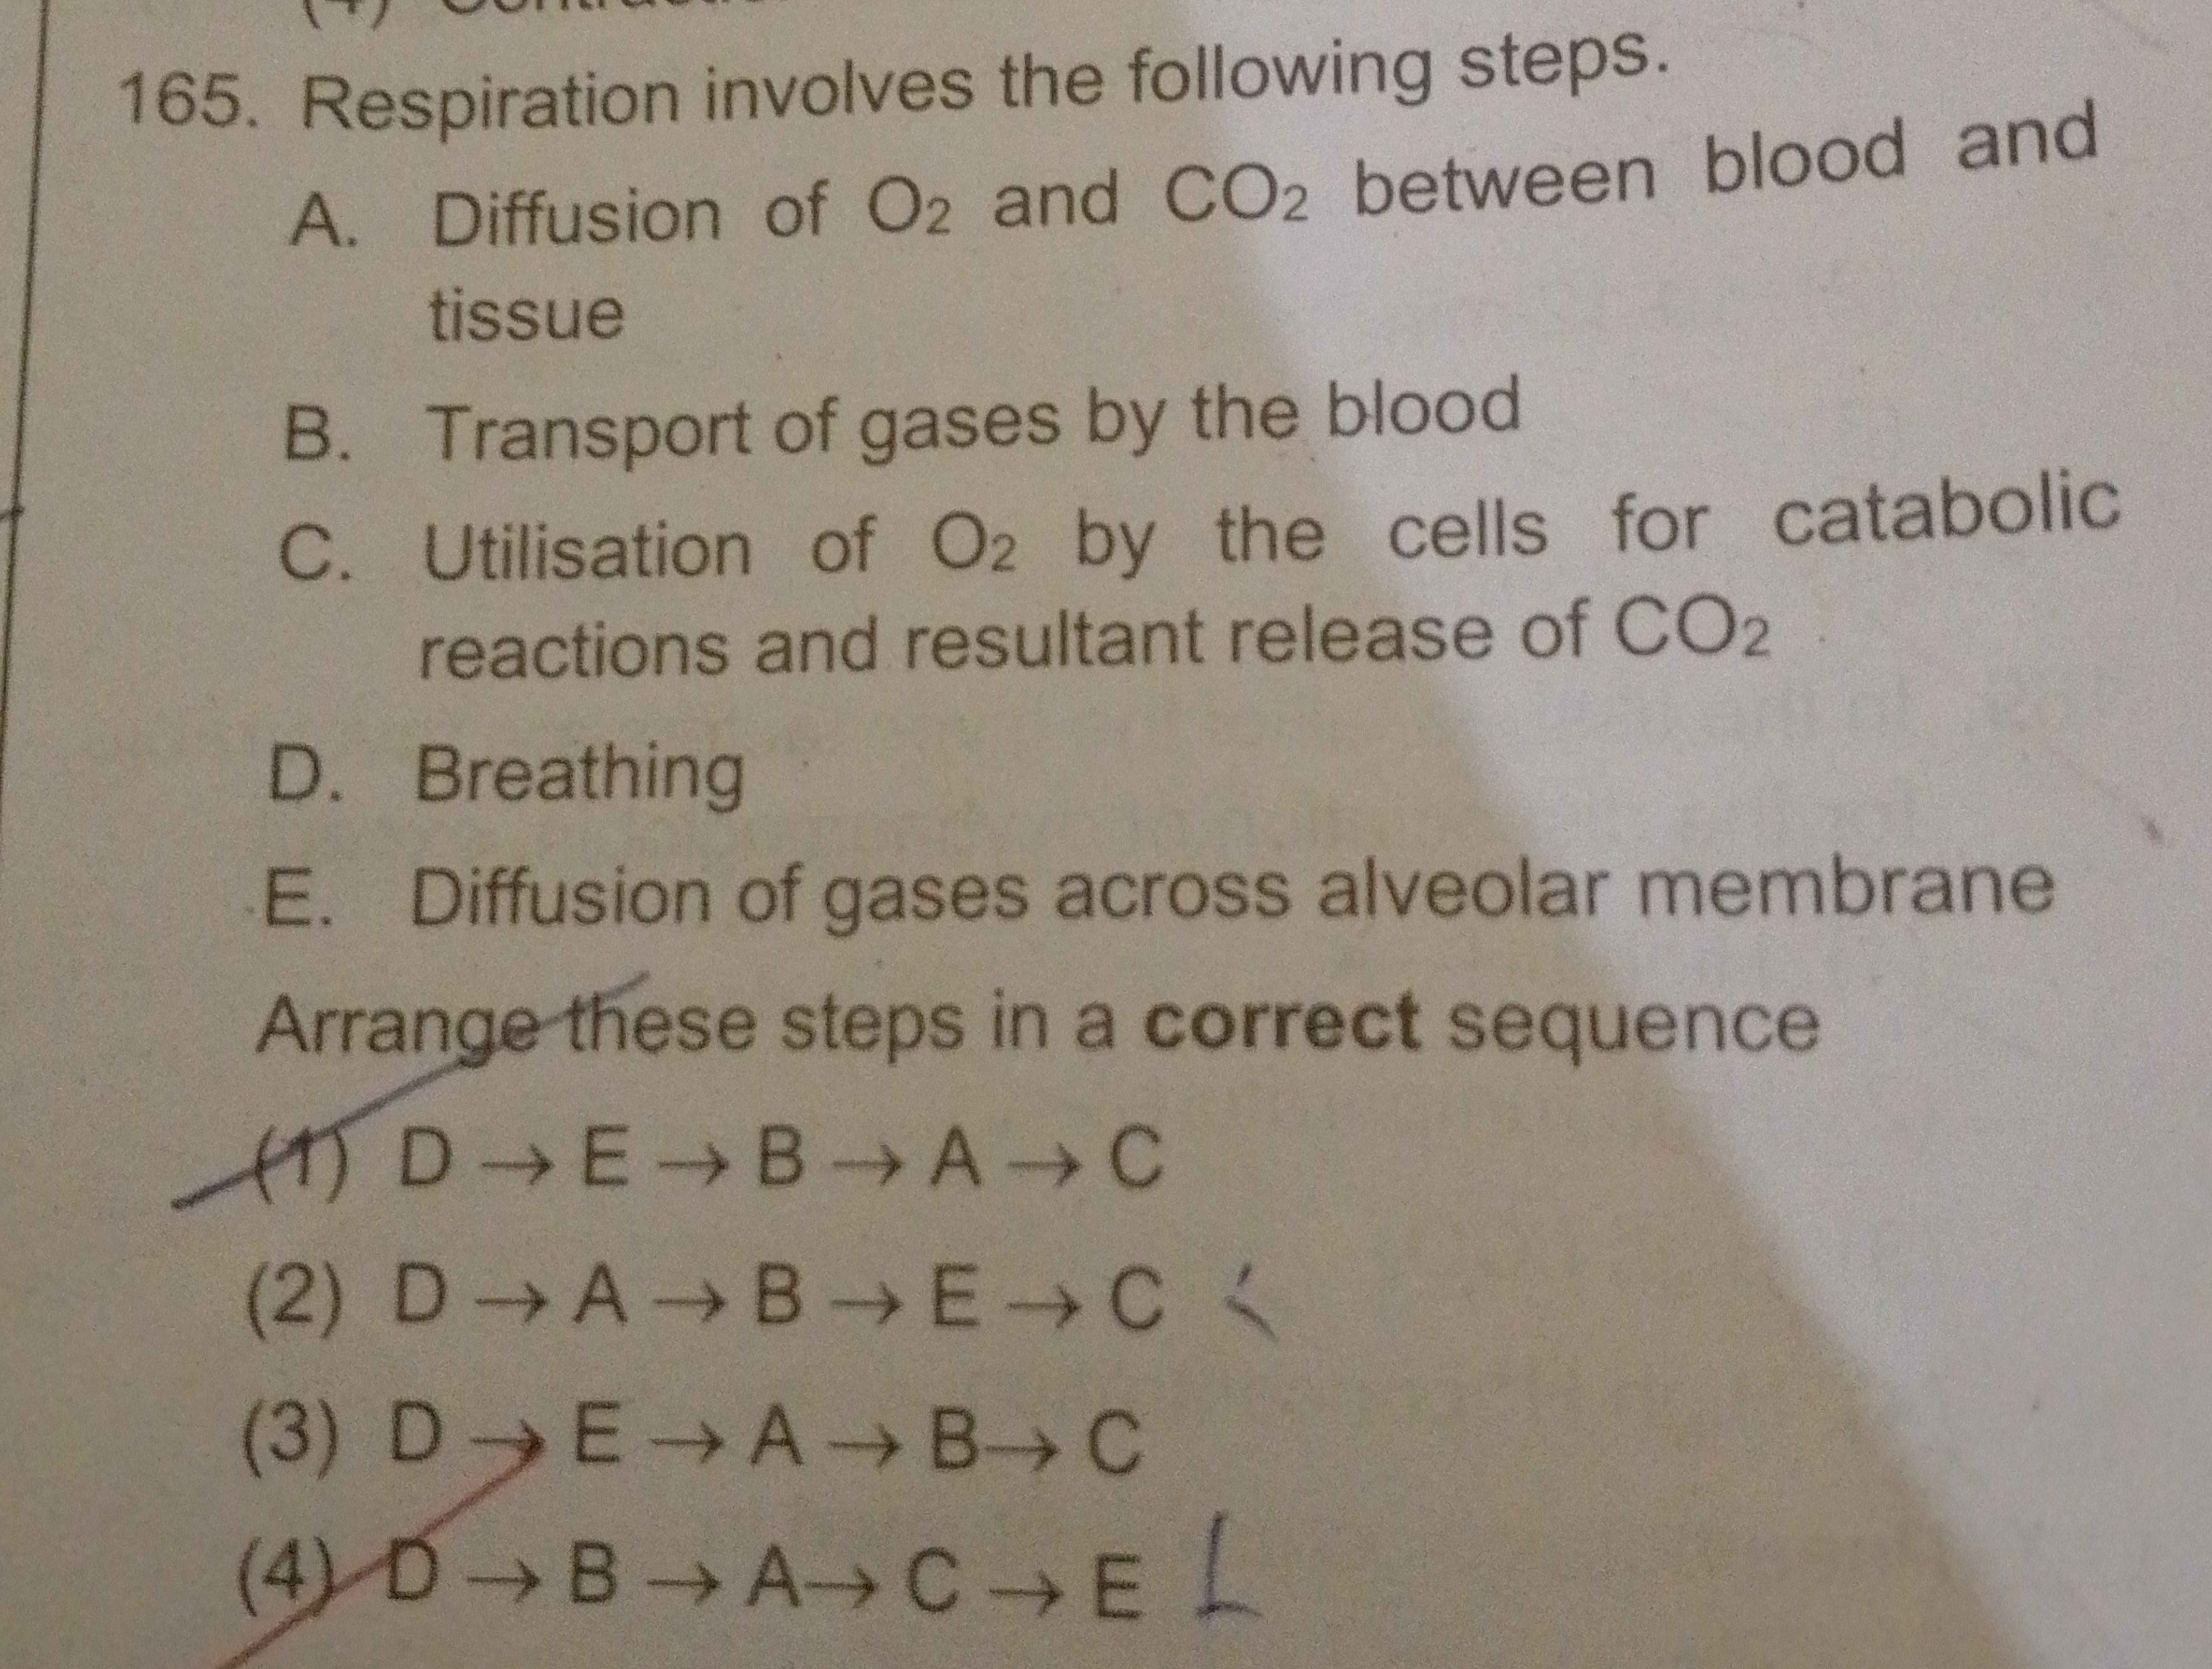 Respiration involves the following steps. A. Diffusion of O2​ and CO2​